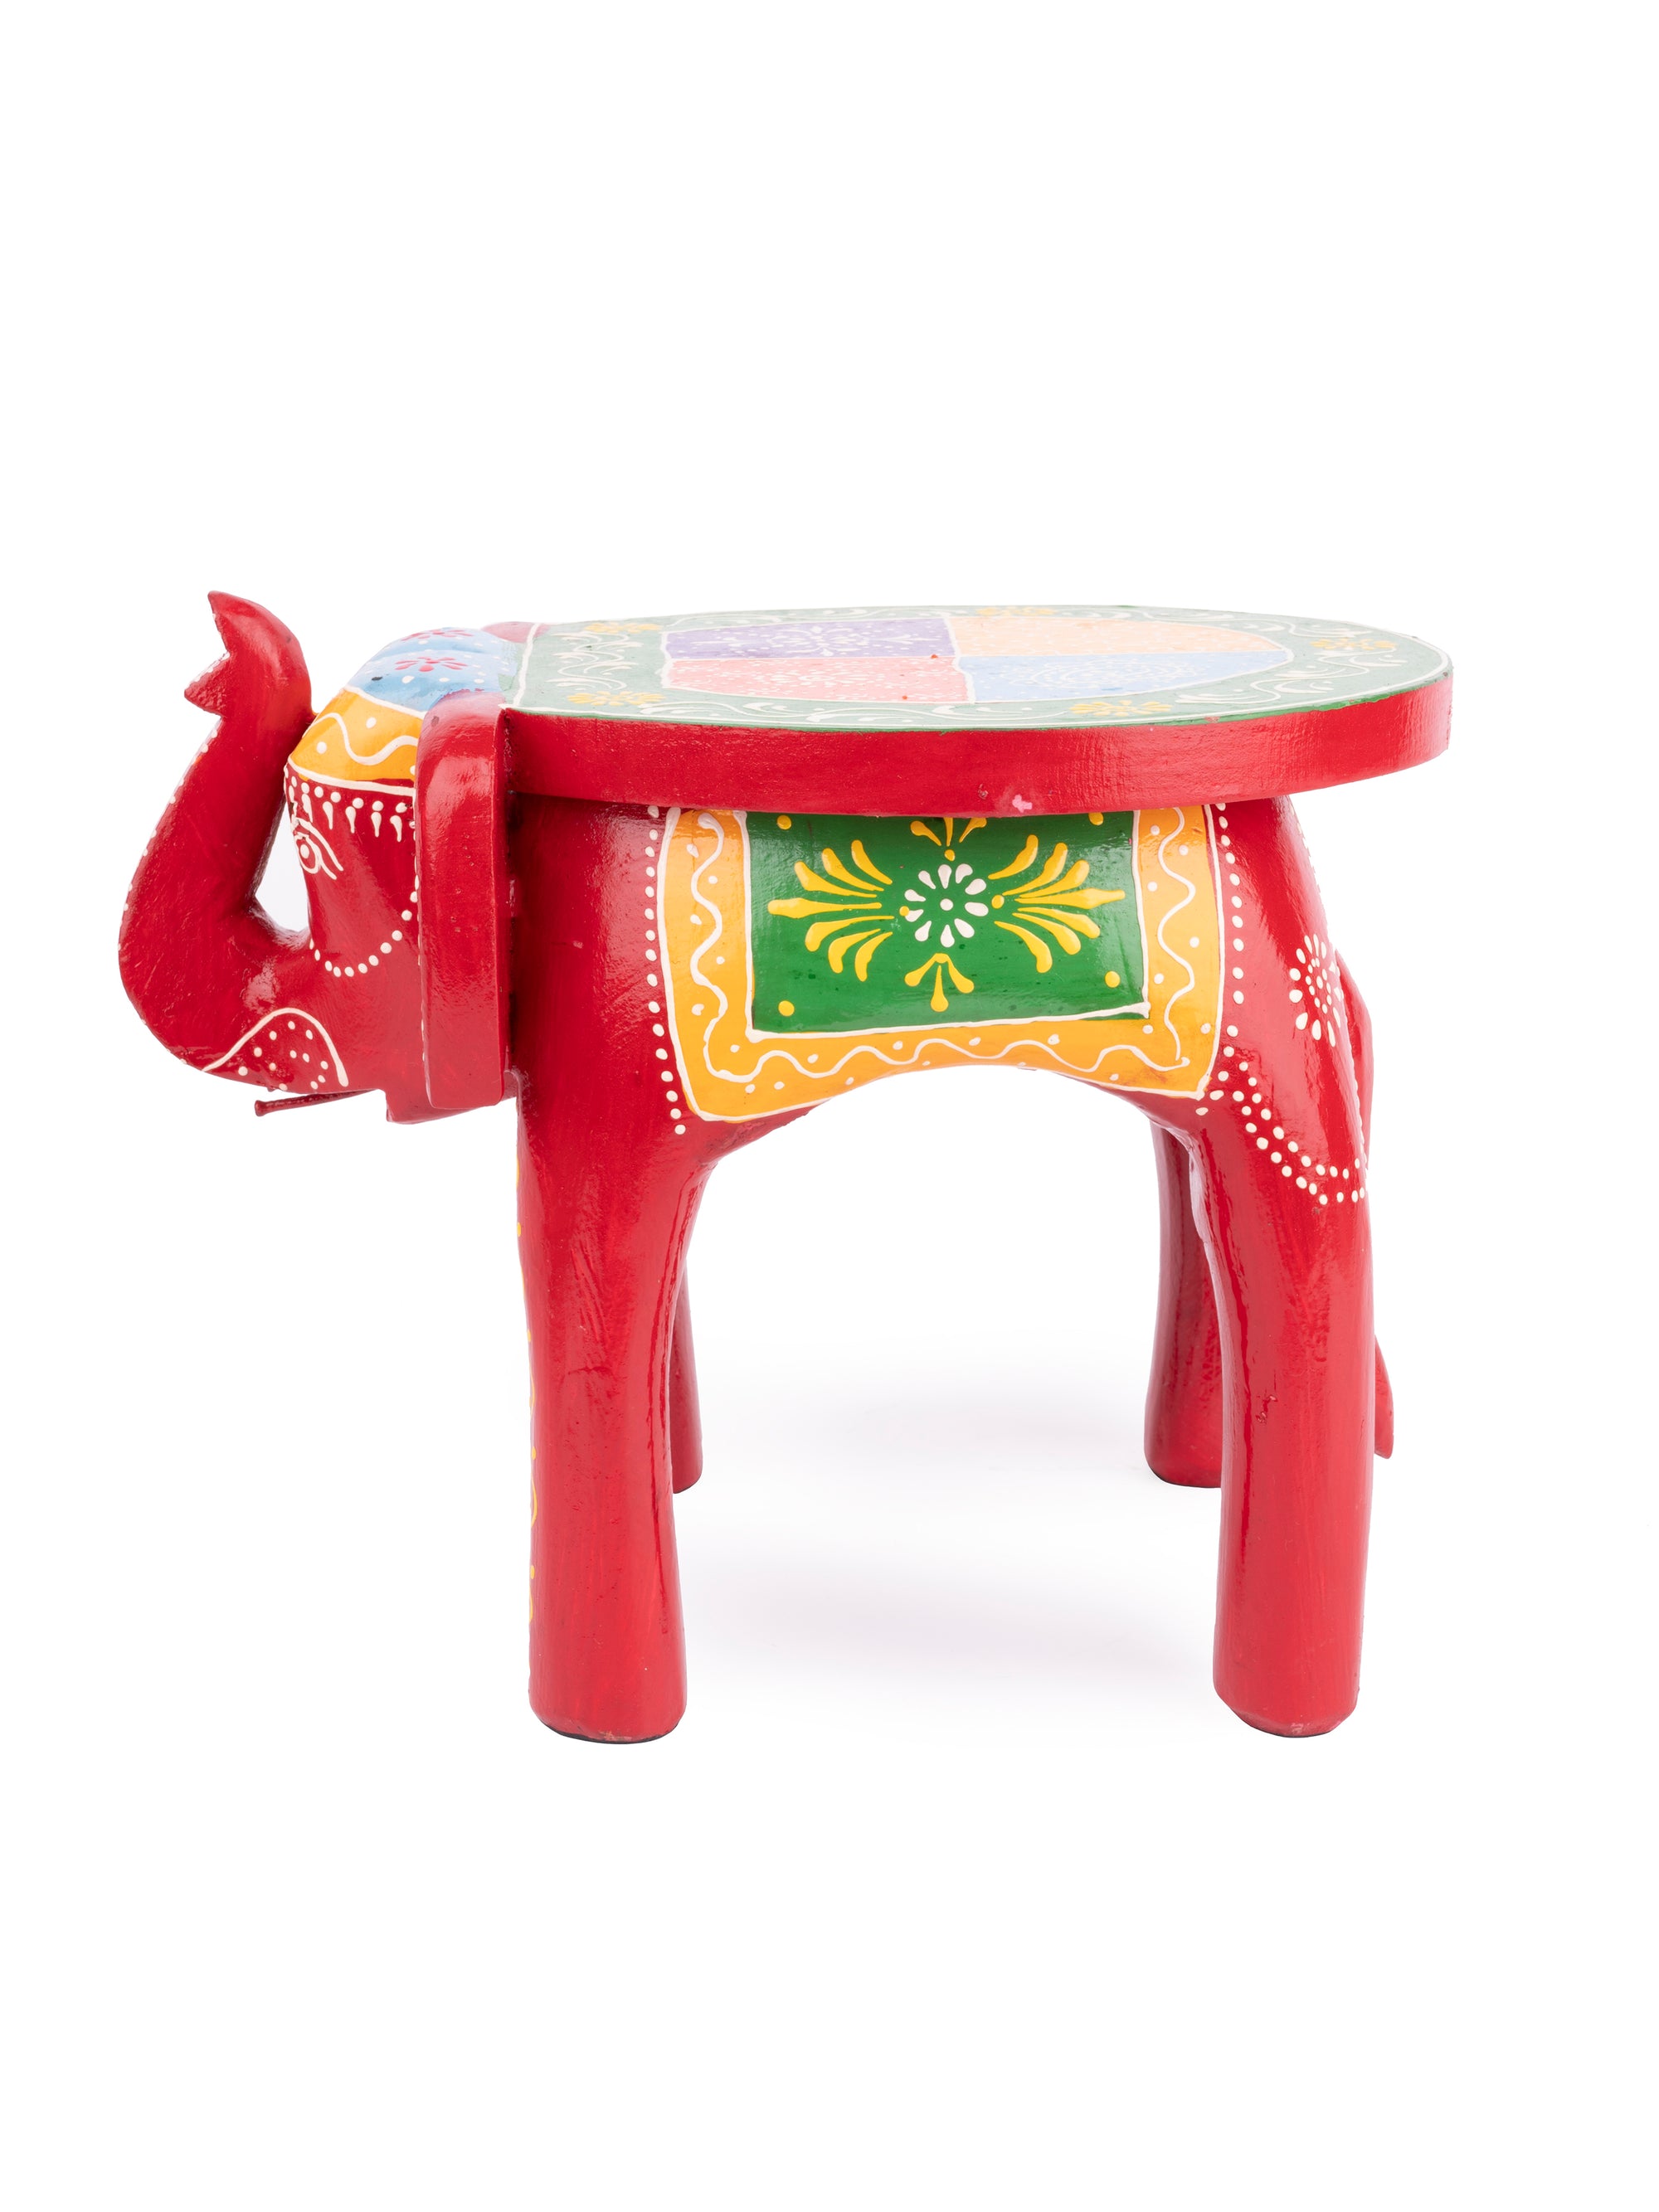 Wooden Hand Painted Multipurpose Elephant Stool 10 inches - The Heritage Artifacts